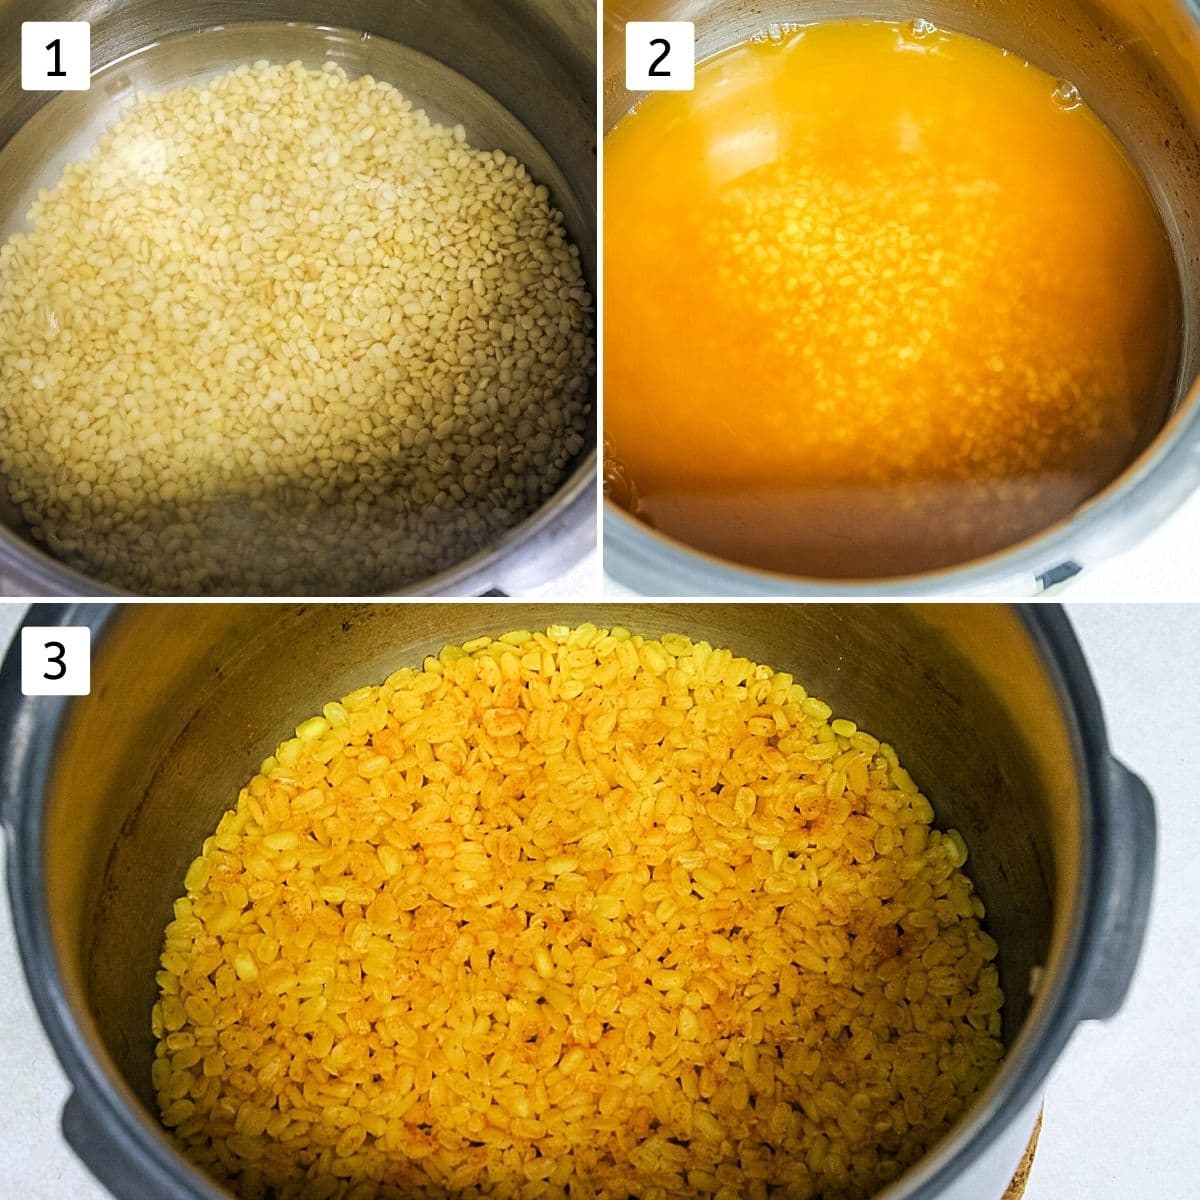 Collage of 3 images showing urad dal in a pressure cooker, adding turmeric and chili powder, cooked dal.